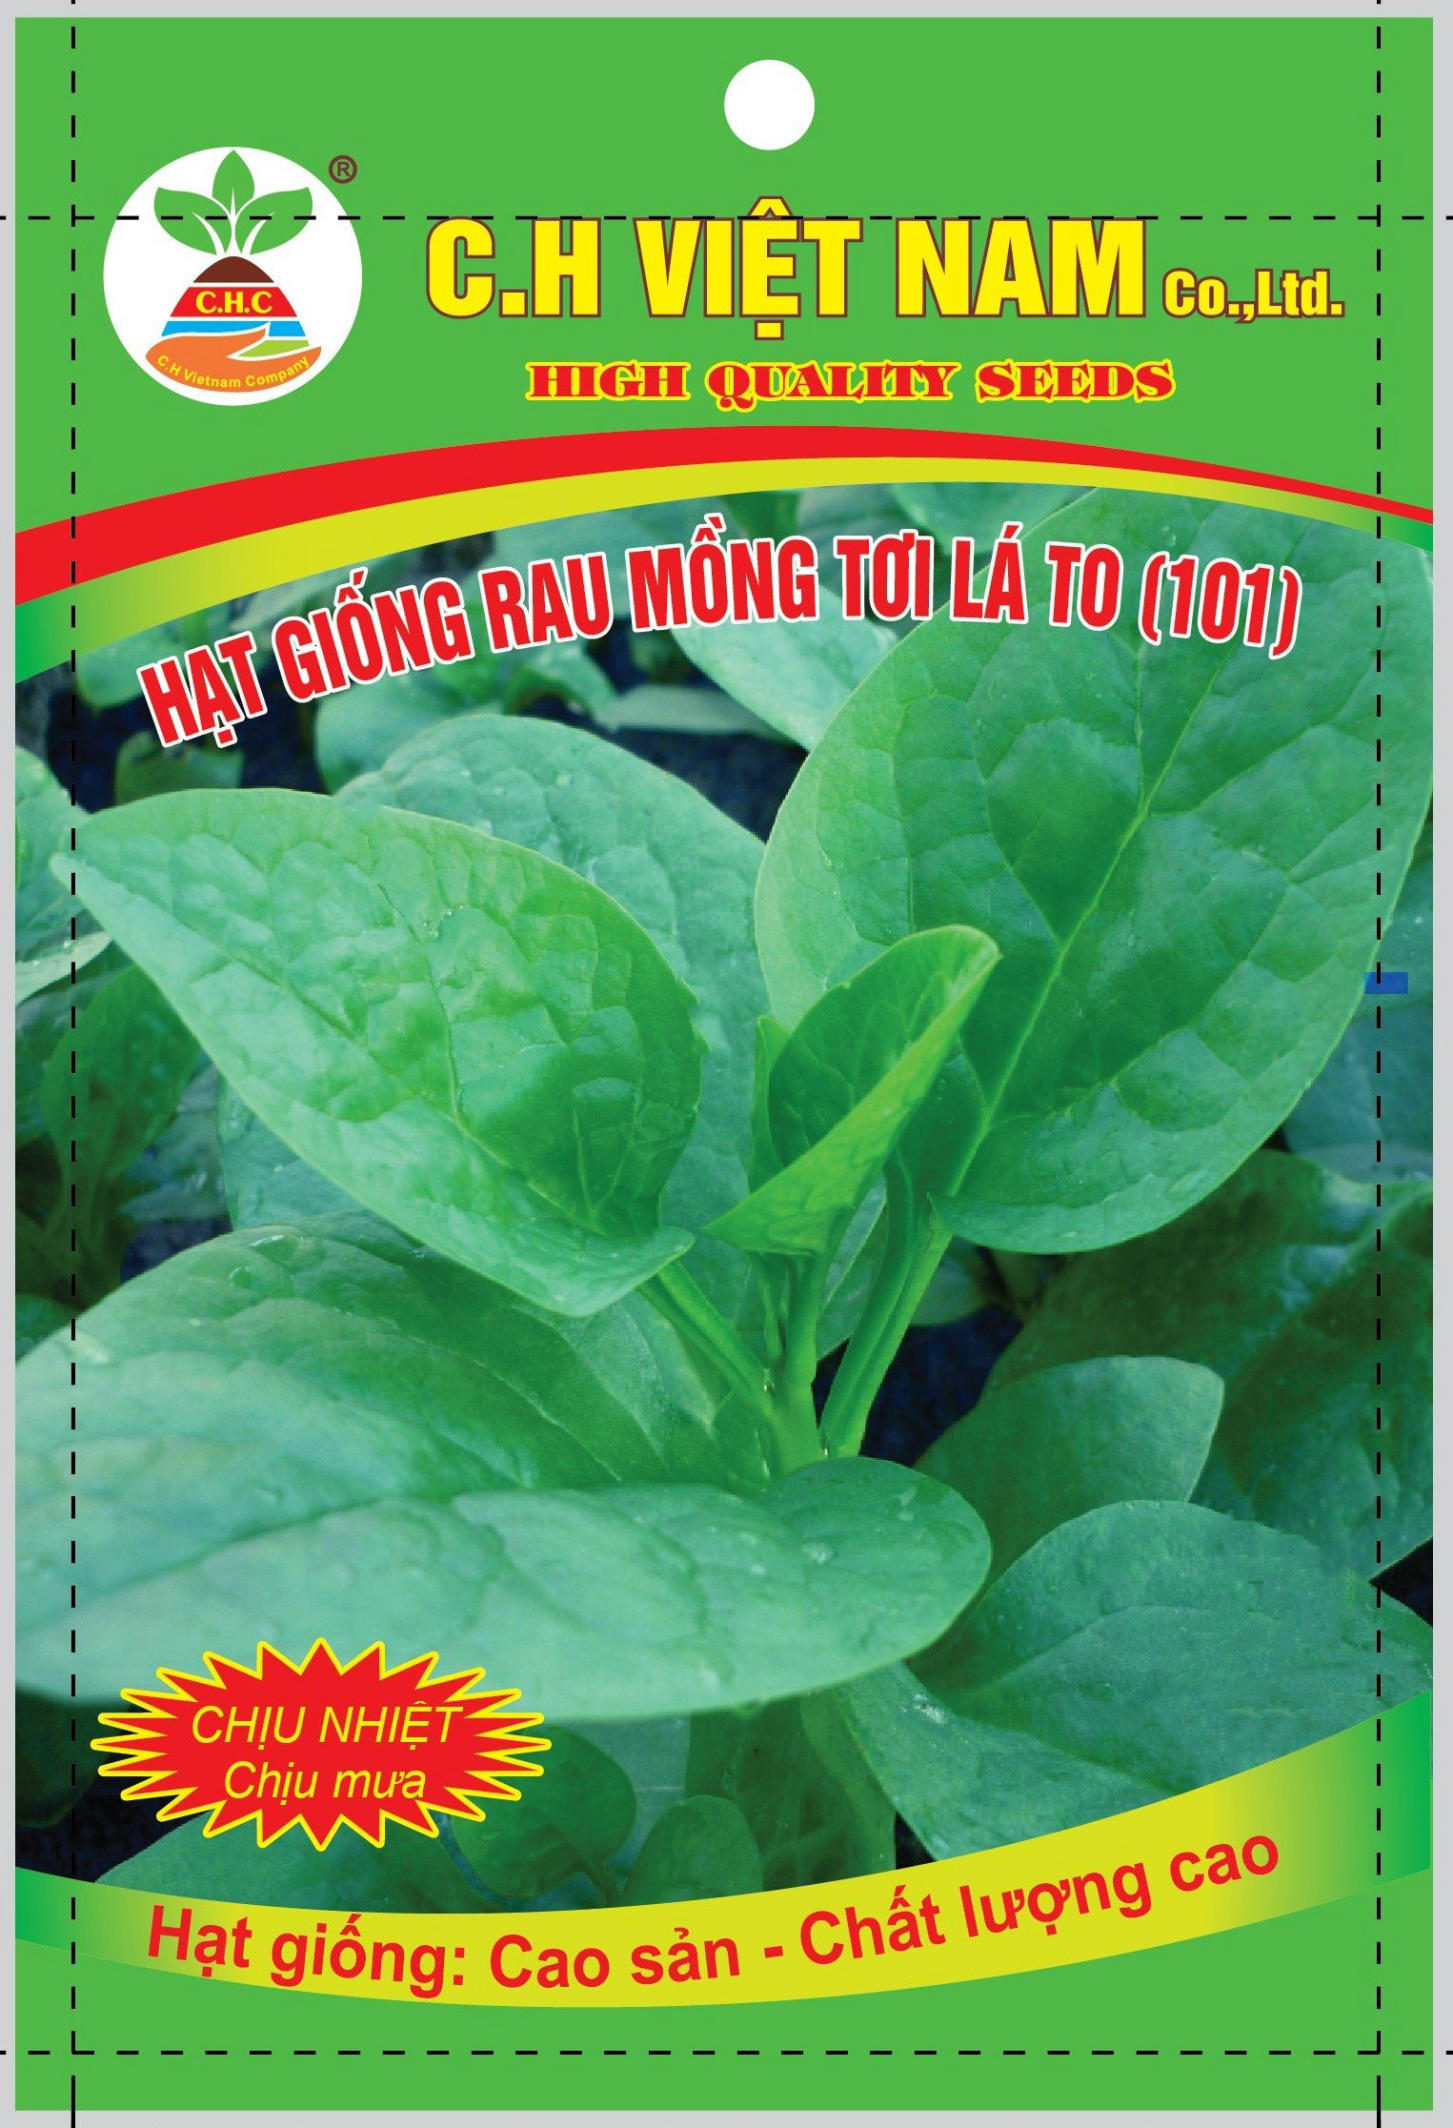 Malabar spinach seeds with large leaves />
                                                 		<script>
                                                            var modal = document.getElementById(